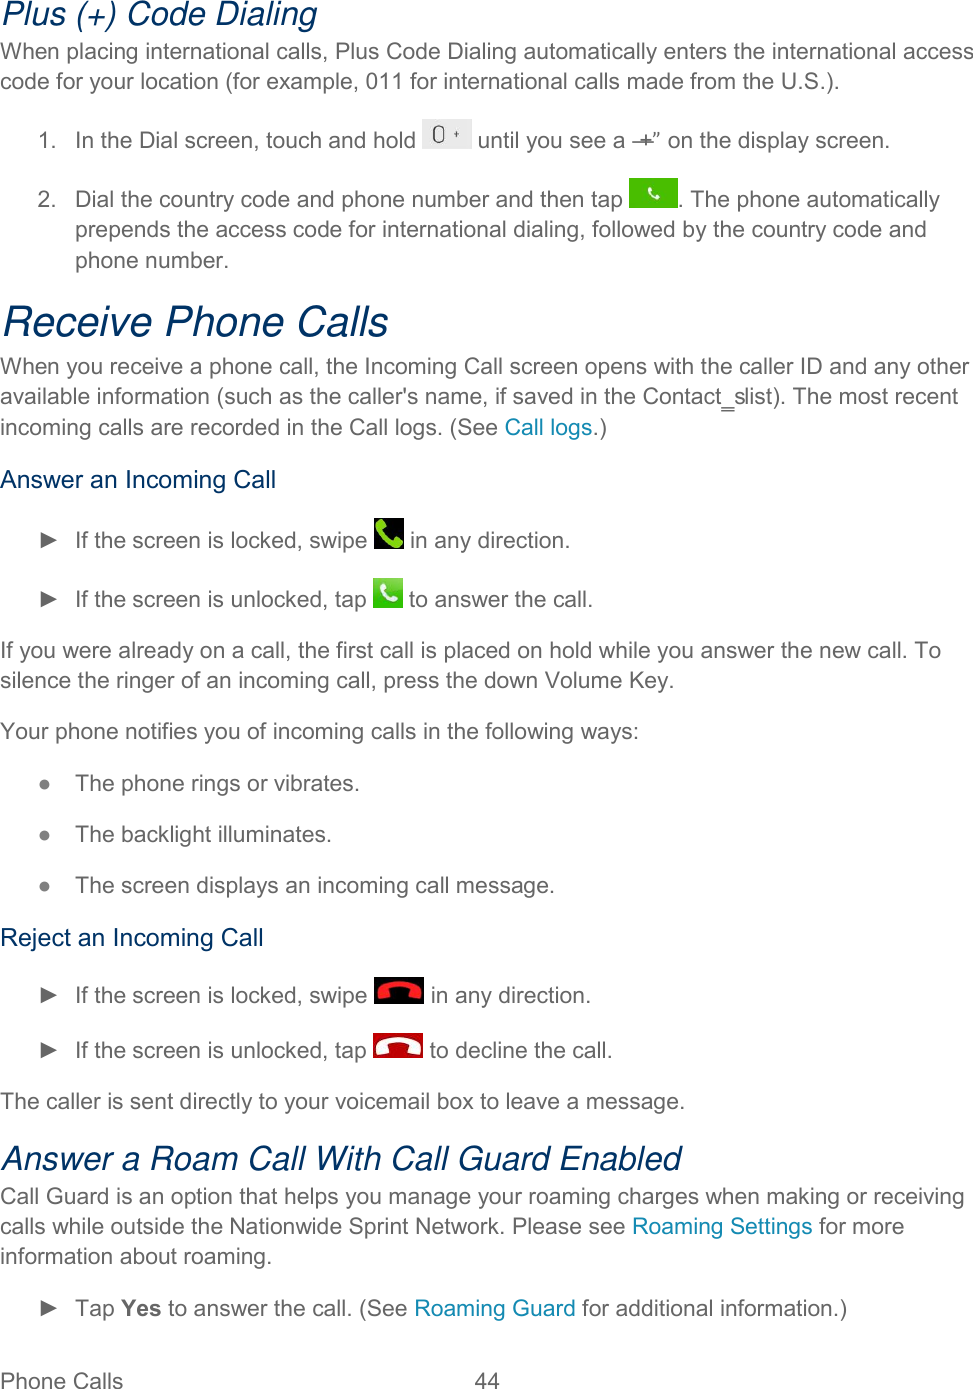  Phone Calls  44   Plus (+) Code Dialing When placing international calls, Plus Code Dialing automatically enters the international access code for your location (for example, 011 for international calls made from the U.S.). 1.  In the Dial screen, touch and hold   until you see a ―+” on the display screen. 2.  Dial the country code and phone number and then tap  . The phone automatically prepends the access code for international dialing, followed by the country code and phone number. Receive Phone Calls When you receive a phone call, the Incoming Call screen opens with the caller ID and any other available information (such as the caller&apos;s name, if saved in the Contact‗s list). The most recent incoming calls are recorded in the Call logs. (See Call logs.) Answer an Incoming Call ►  If the screen is locked, swipe   in any direction. ►  If the screen is unlocked, tap   to answer the call. If you were already on a call, the first call is placed on hold while you answer the new call. To silence the ringer of an incoming call, press the down Volume Key. Your phone notifies you of incoming calls in the following ways: ●  The phone rings or vibrates. ●  The backlight illuminates. ●  The screen displays an incoming call message. Reject an Incoming Call ►  If the screen is locked, swipe   in any direction. ►  If the screen is unlocked, tap   to decline the call. The caller is sent directly to your voicemail box to leave a message. Answer a Roam Call With Call Guard Enabled Call Guard is an option that helps you manage your roaming charges when making or receiving calls while outside the Nationwide Sprint Network. Please see Roaming Settings for more information about roaming. ►  Tap Yes to answer the call. (See Roaming Guard for additional information.) 